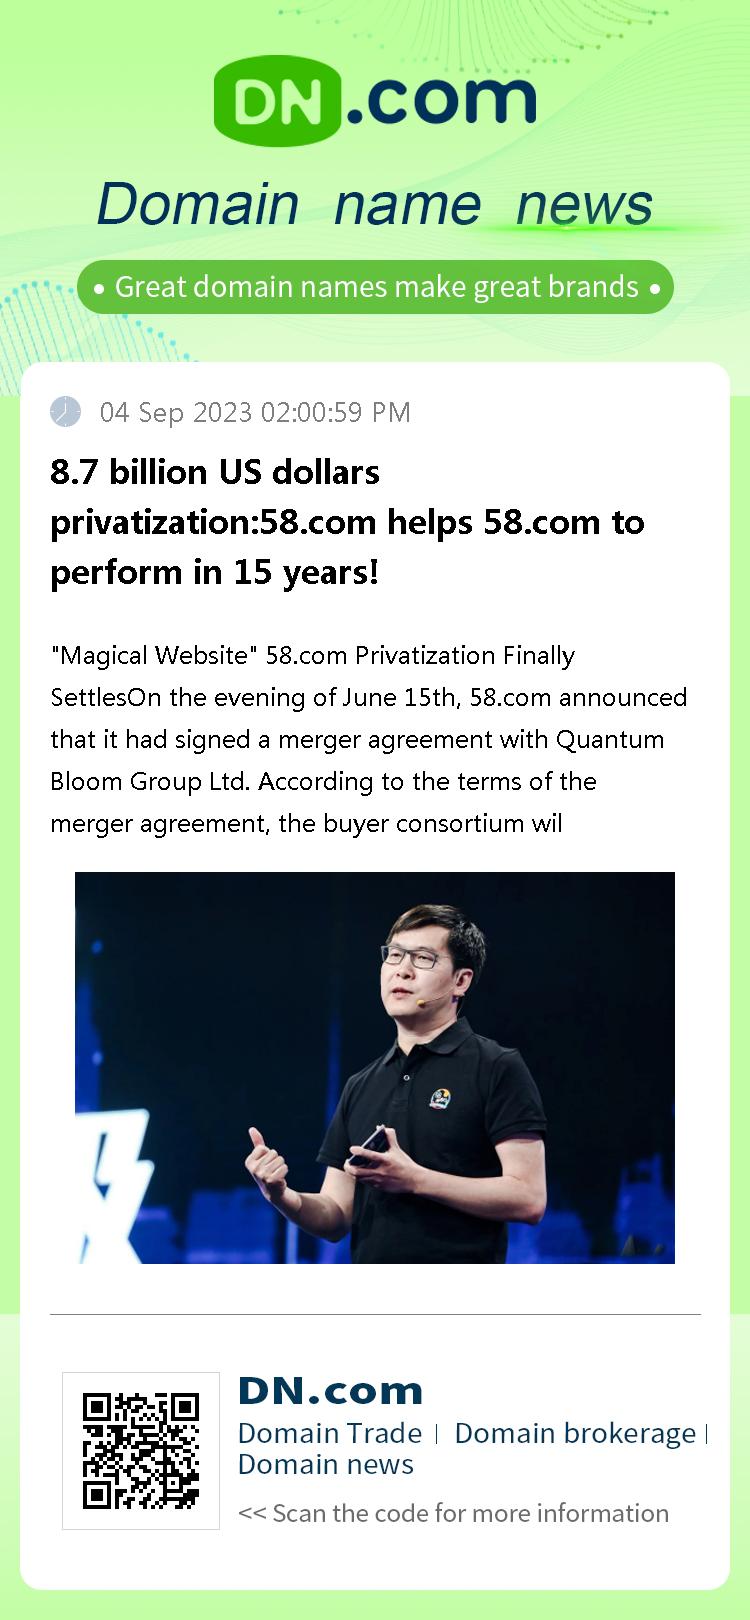 8.7 billion US dollars privatization:58.com helps 58.com to perform in 15 years!